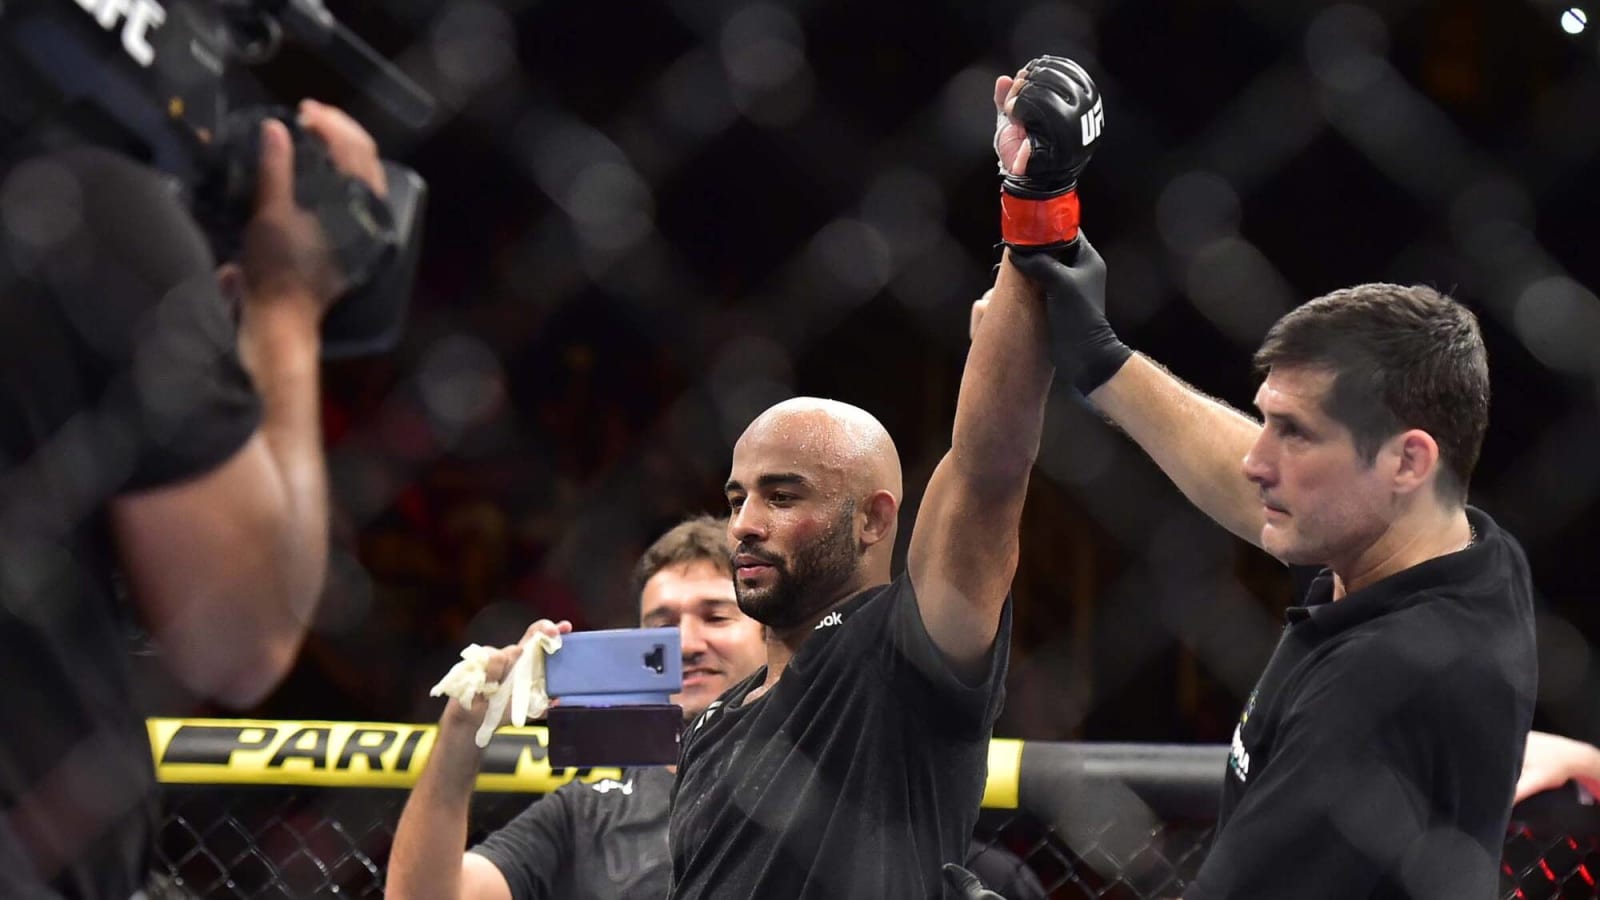 UFC Welterweight Warlley Alves Expects 4 Fights in 2023, Hunts for Bonus at UFC 283